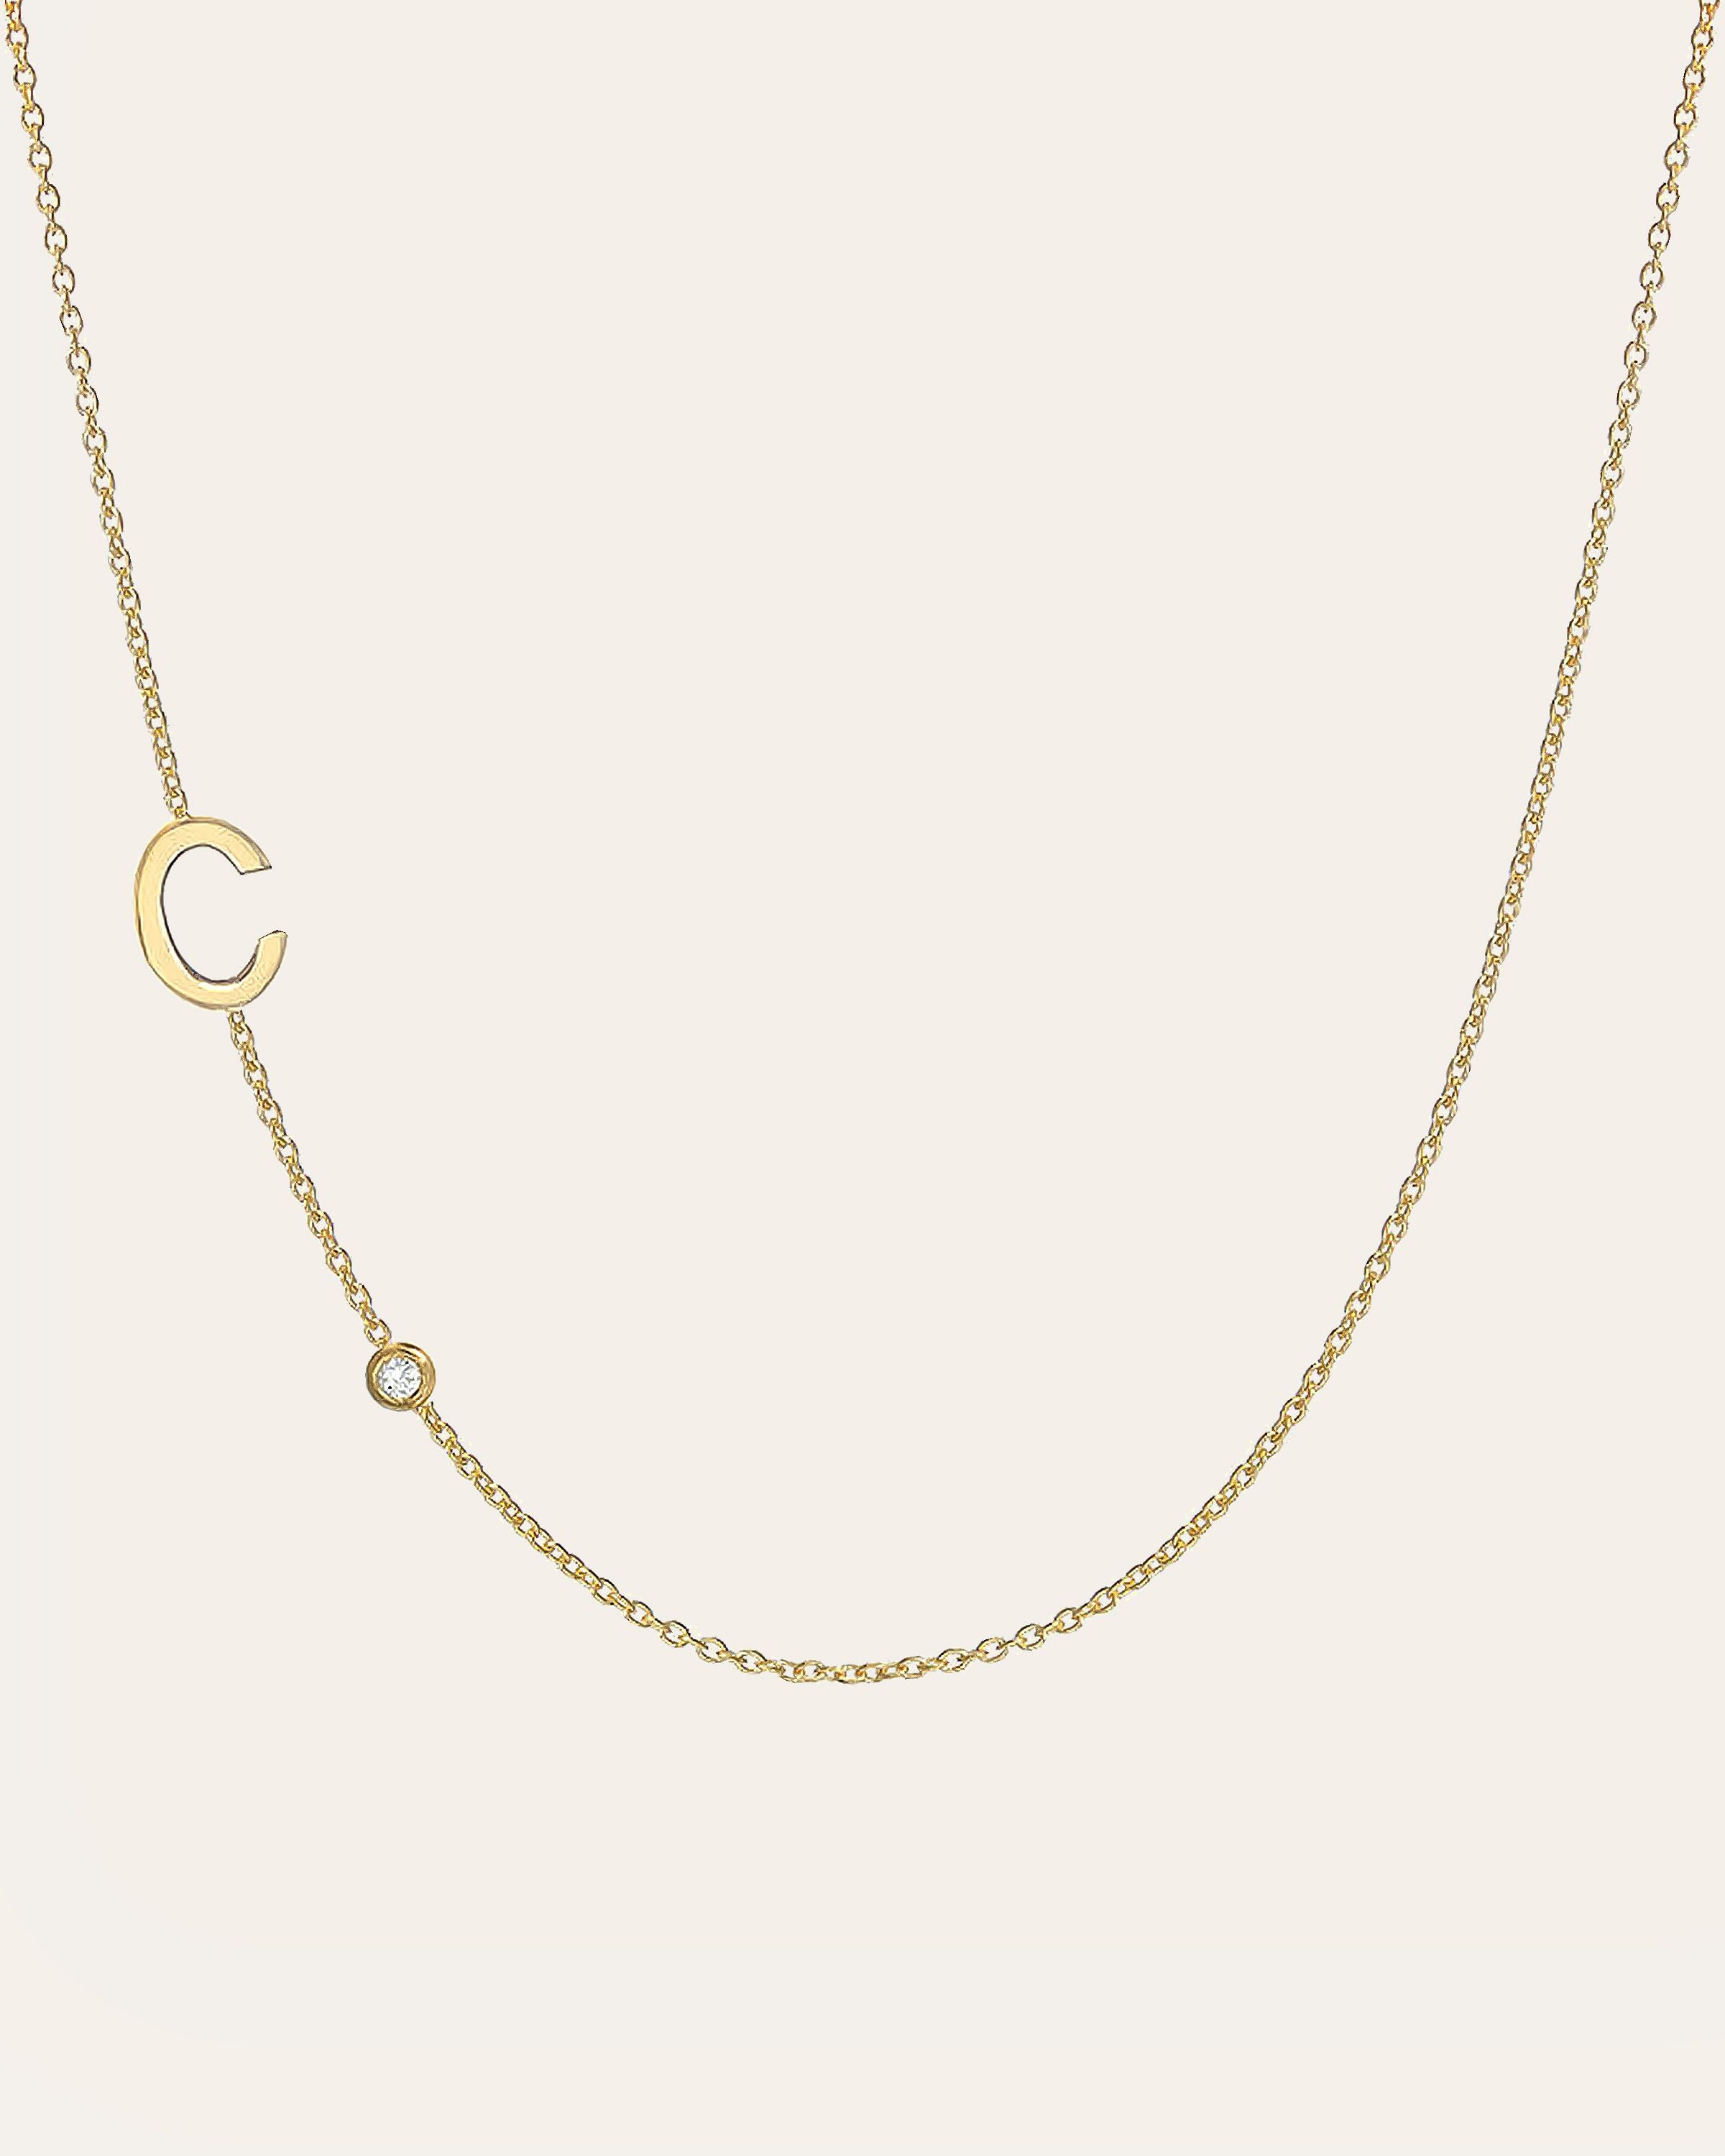 Image of 14k Gold Asymmetrical Initial and Bezel Diamond Necklace